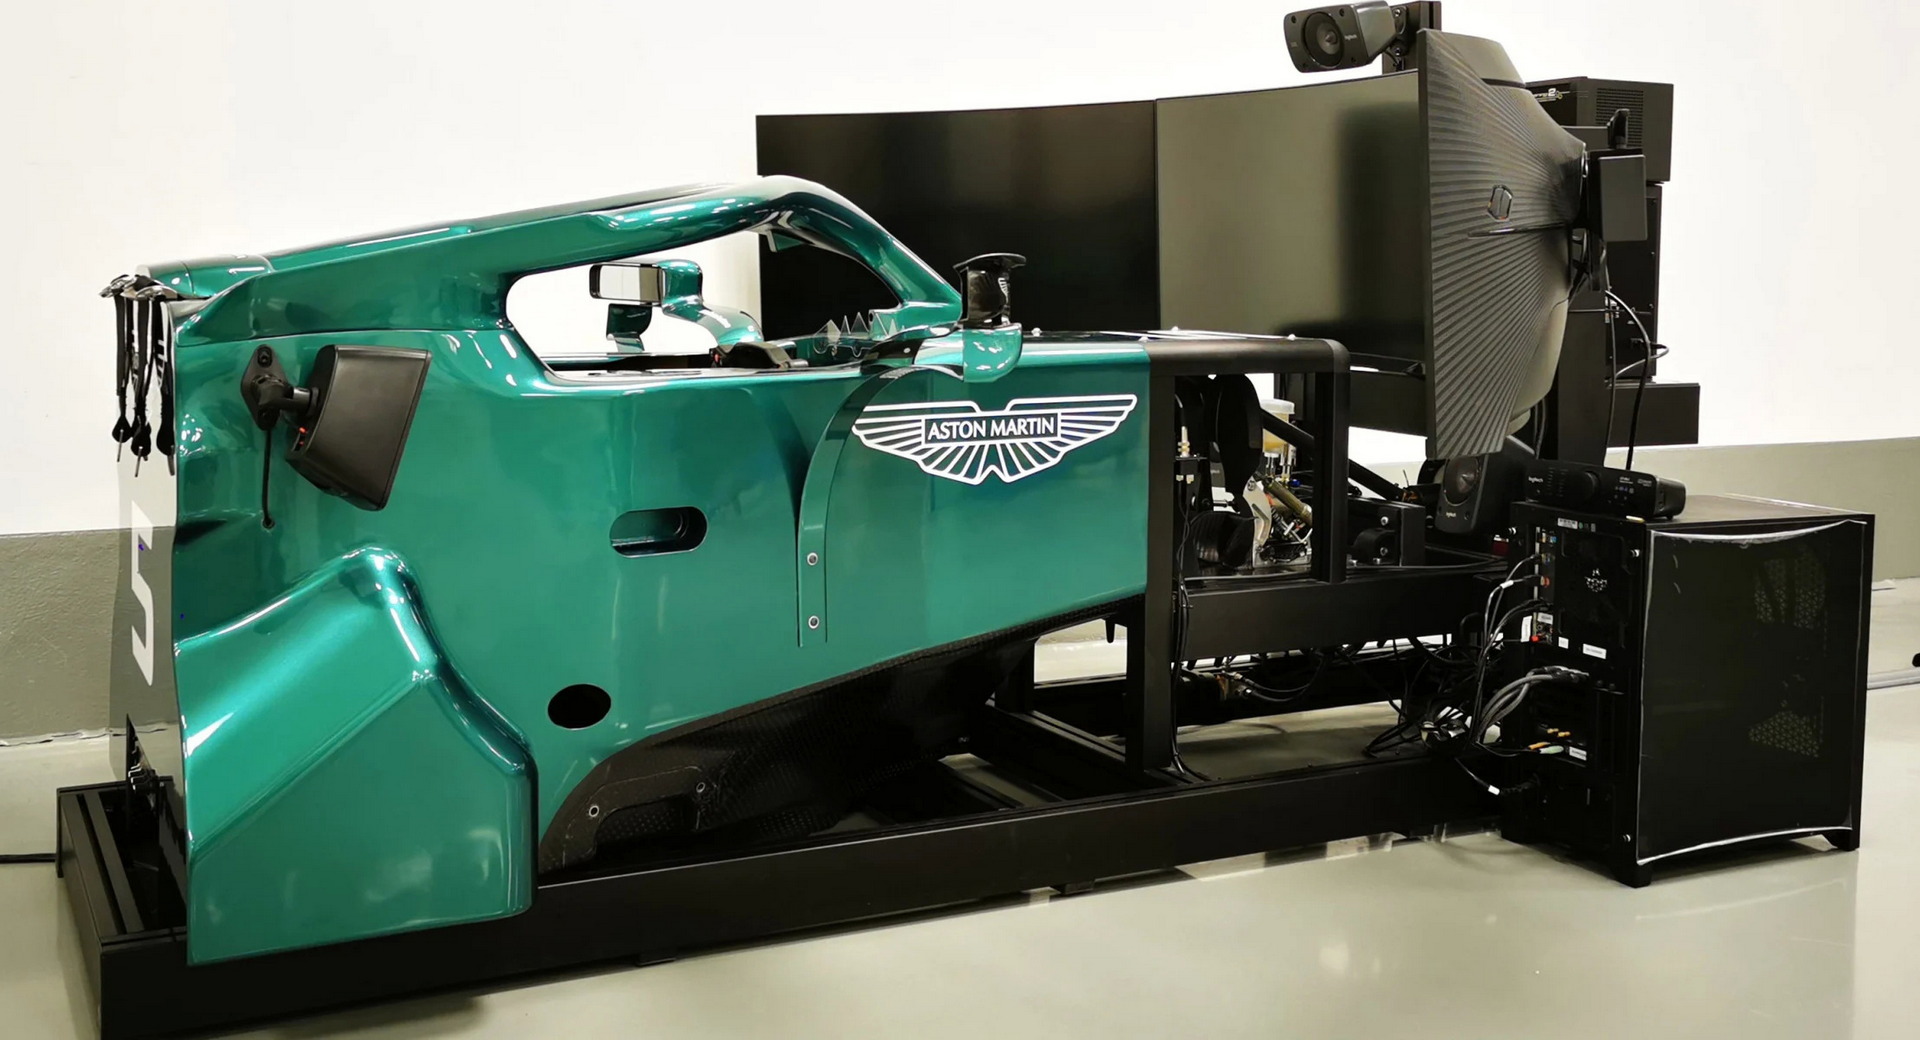 Sebastian Vettel's New Home Racing Sim Rig Is Made From An Actual